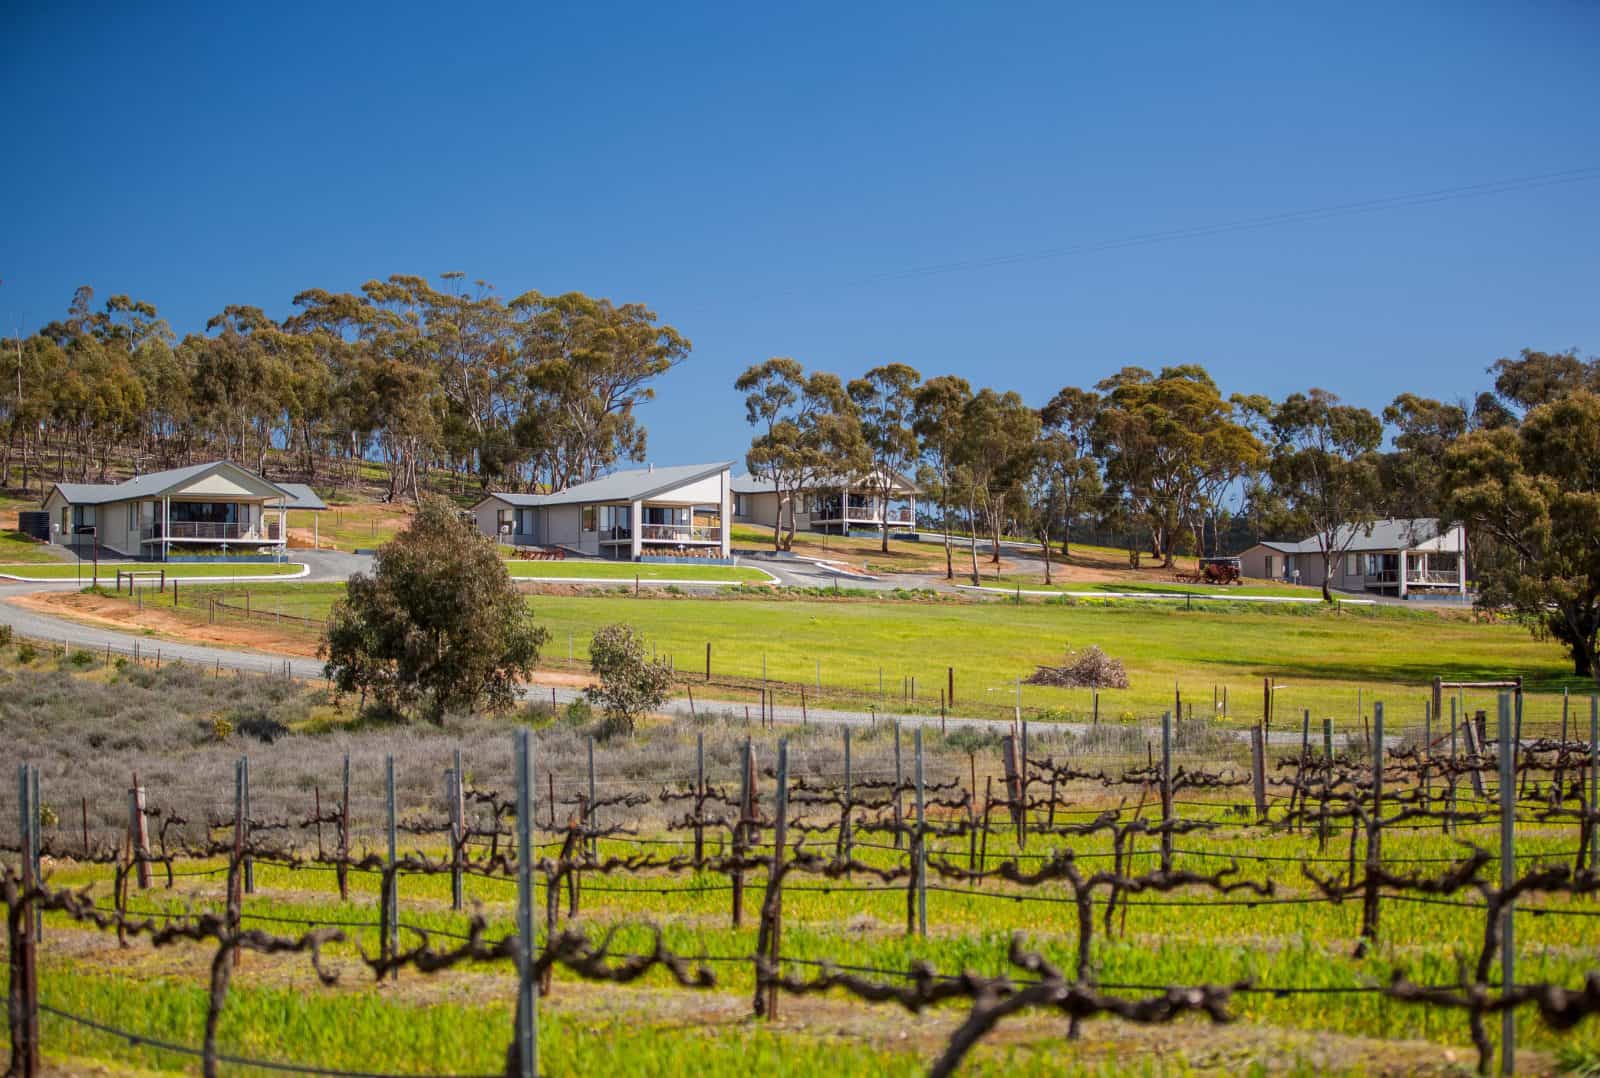 Nestled amongst the trees, overlooking vineyards and natural landscape